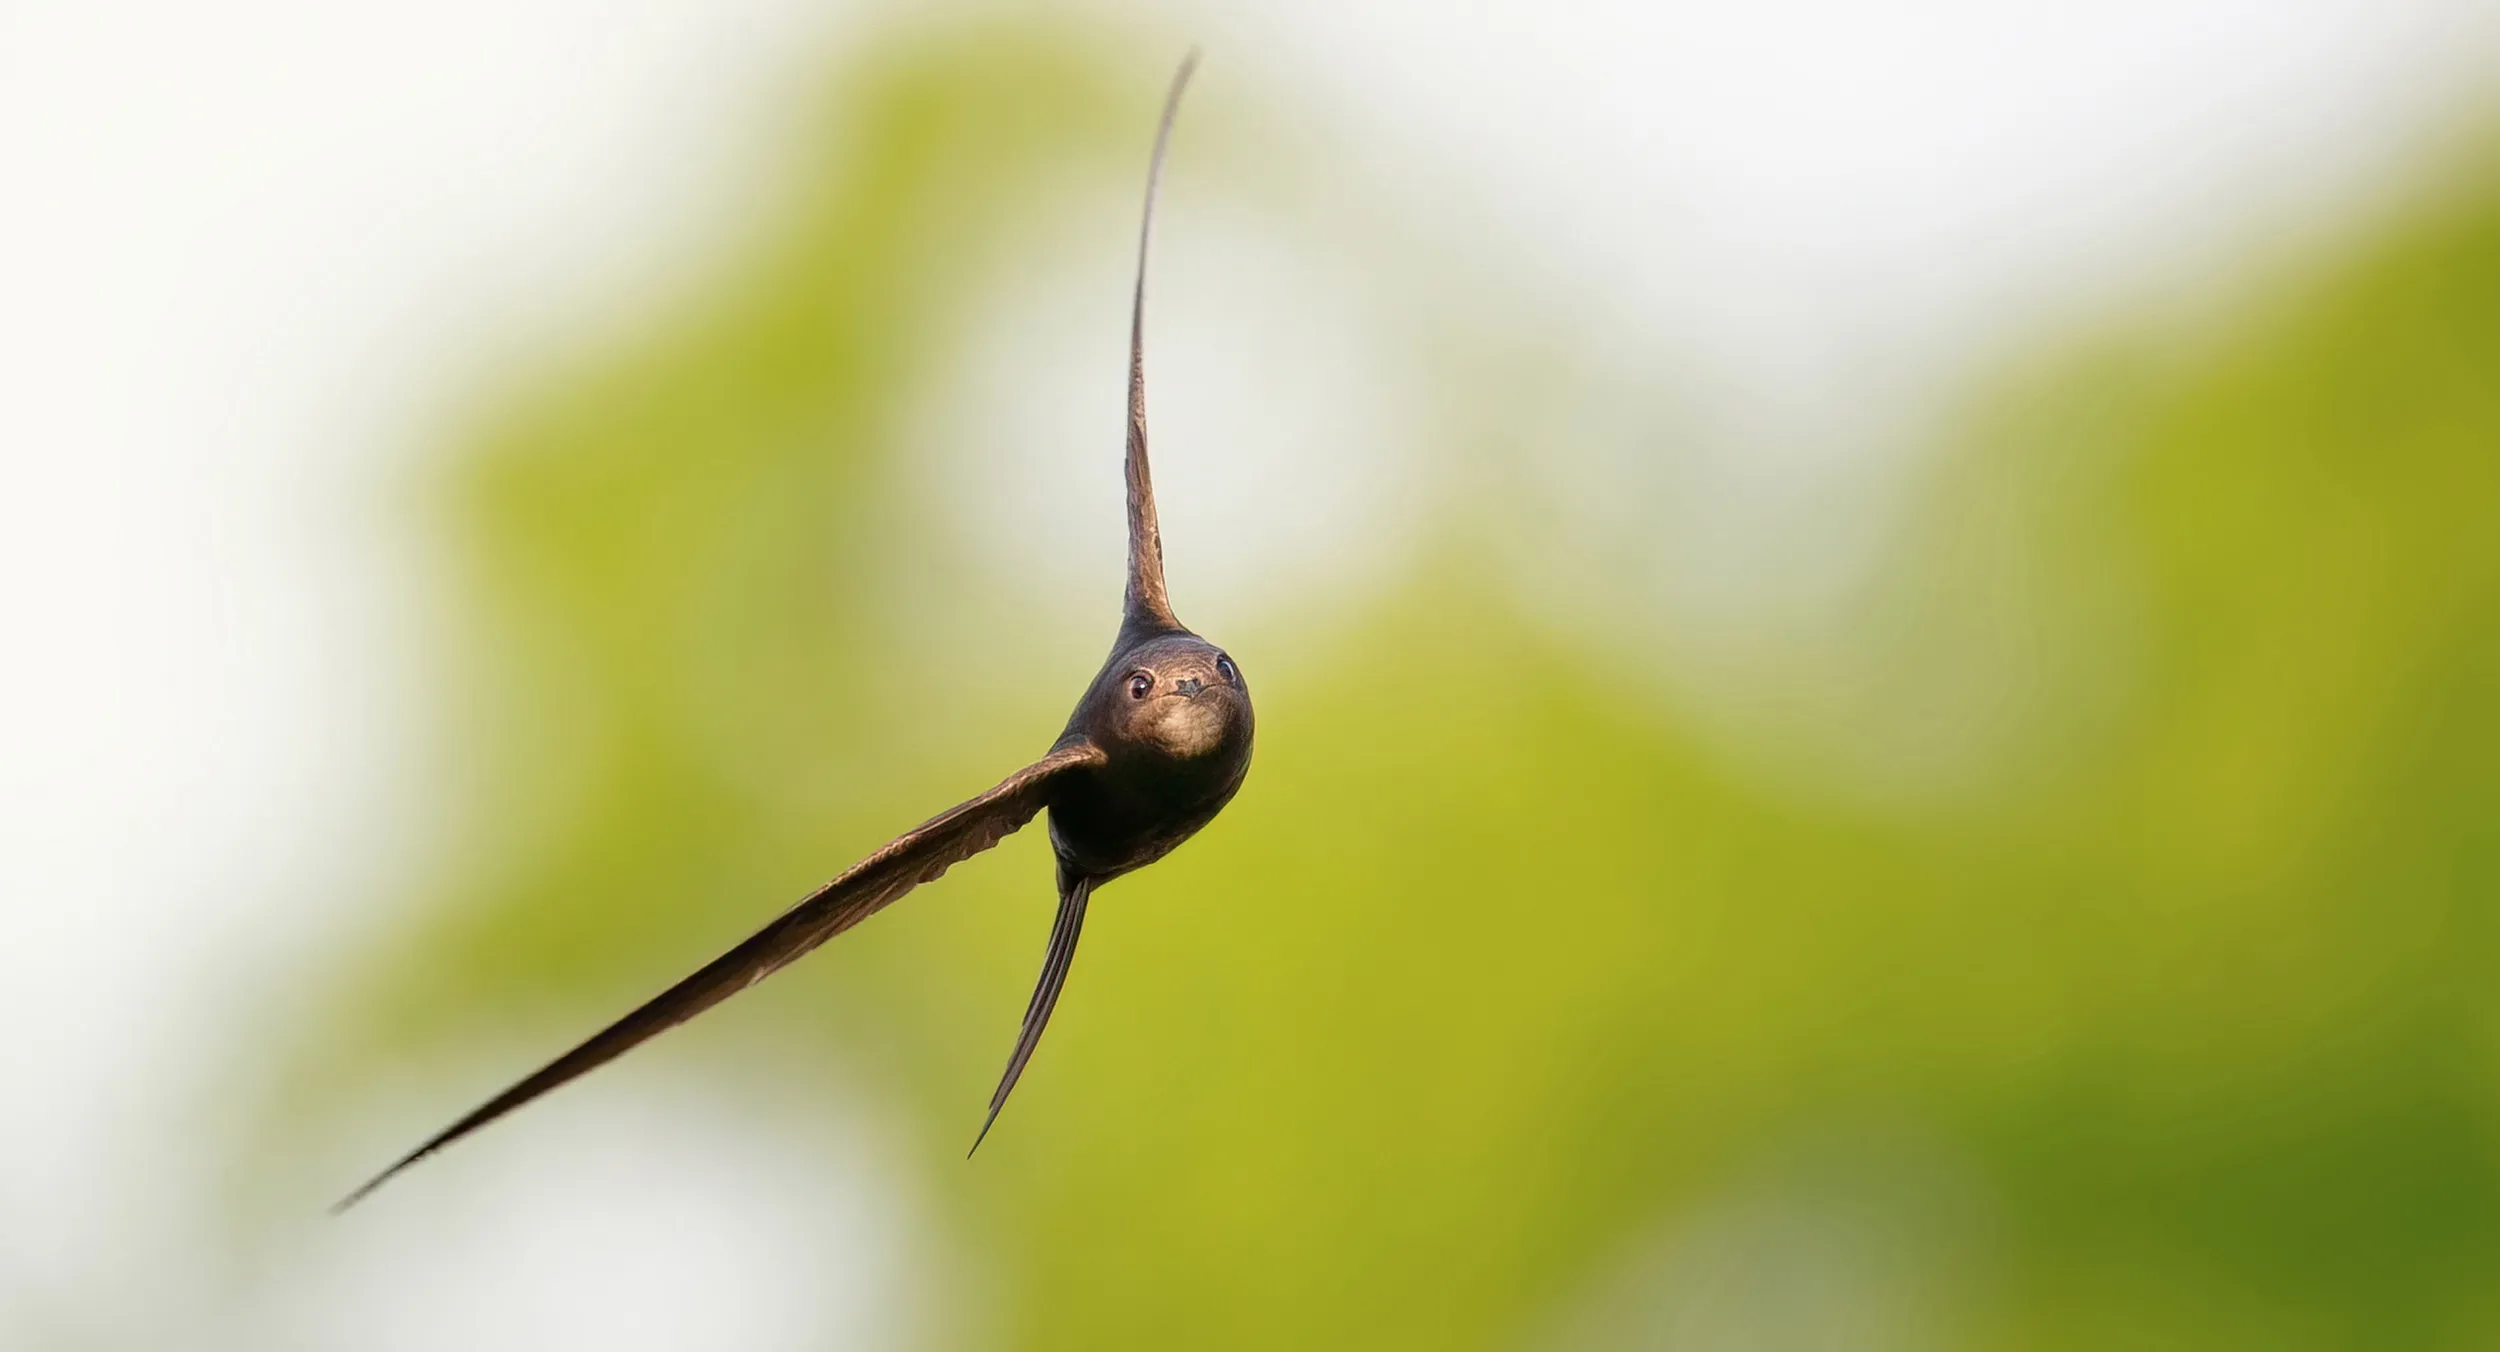 A lone Swift swooping towards the camera.